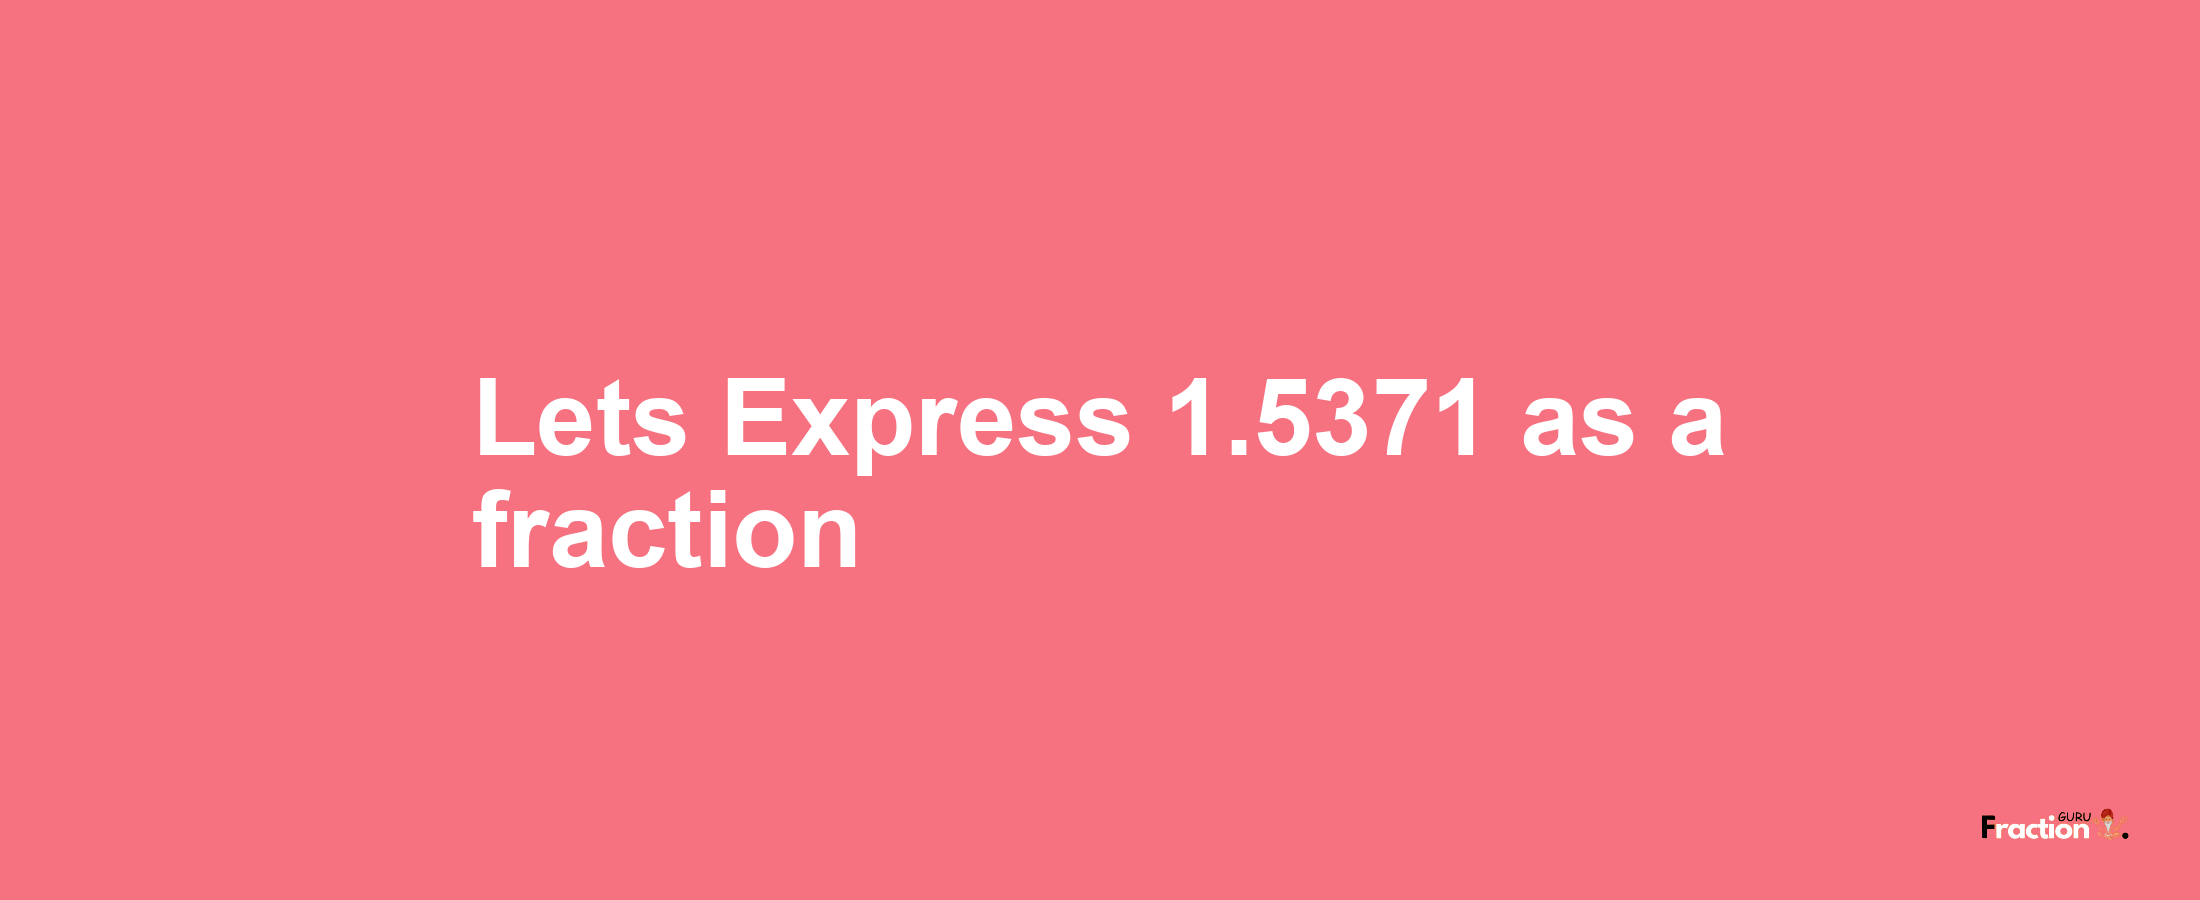 Lets Express 1.5371 as afraction